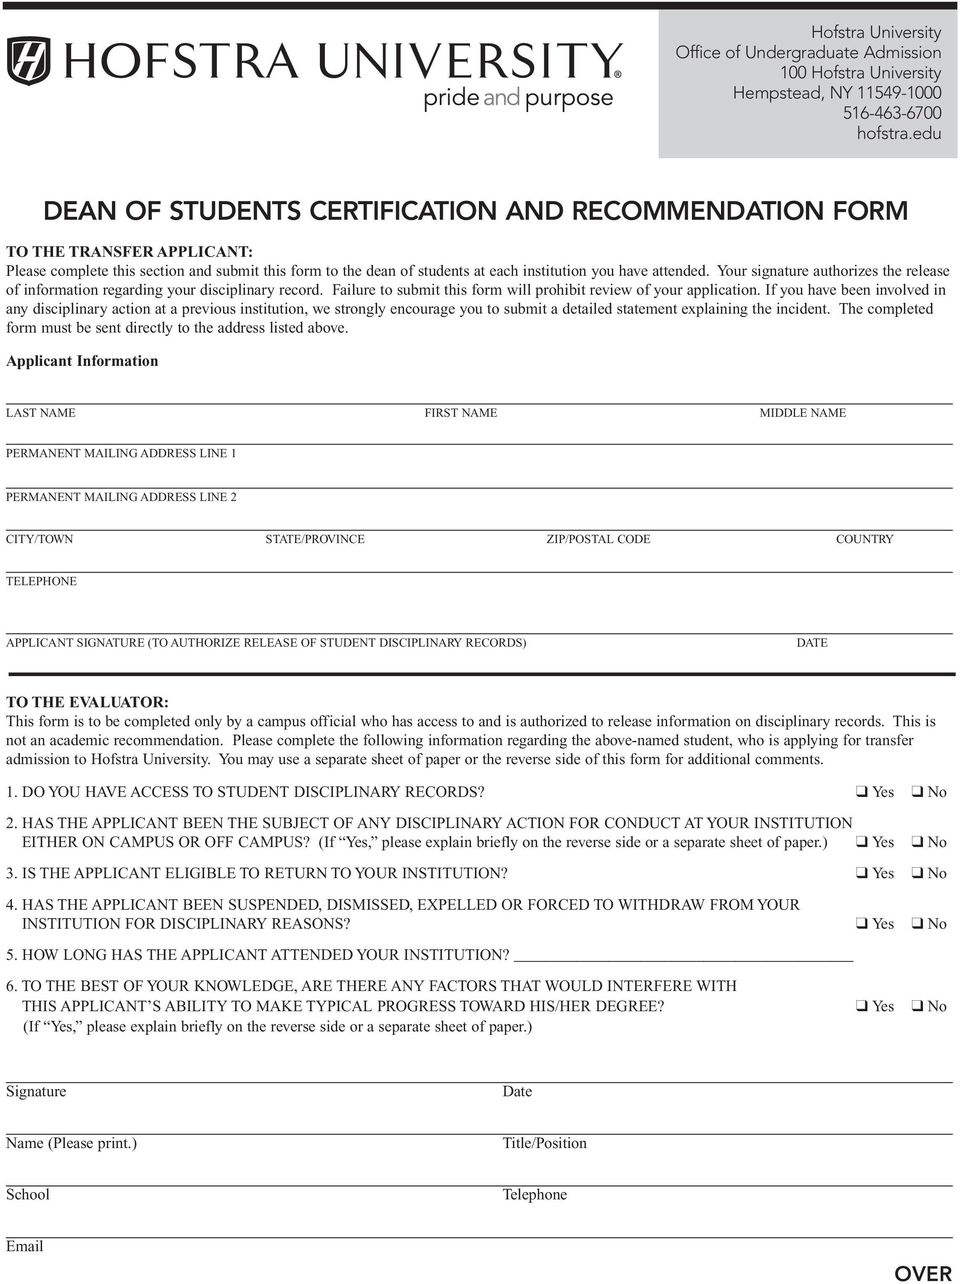 Your signature authorizes the release of information regarding your disciplinary record. Failure to submit this form will prohibit review of your application.